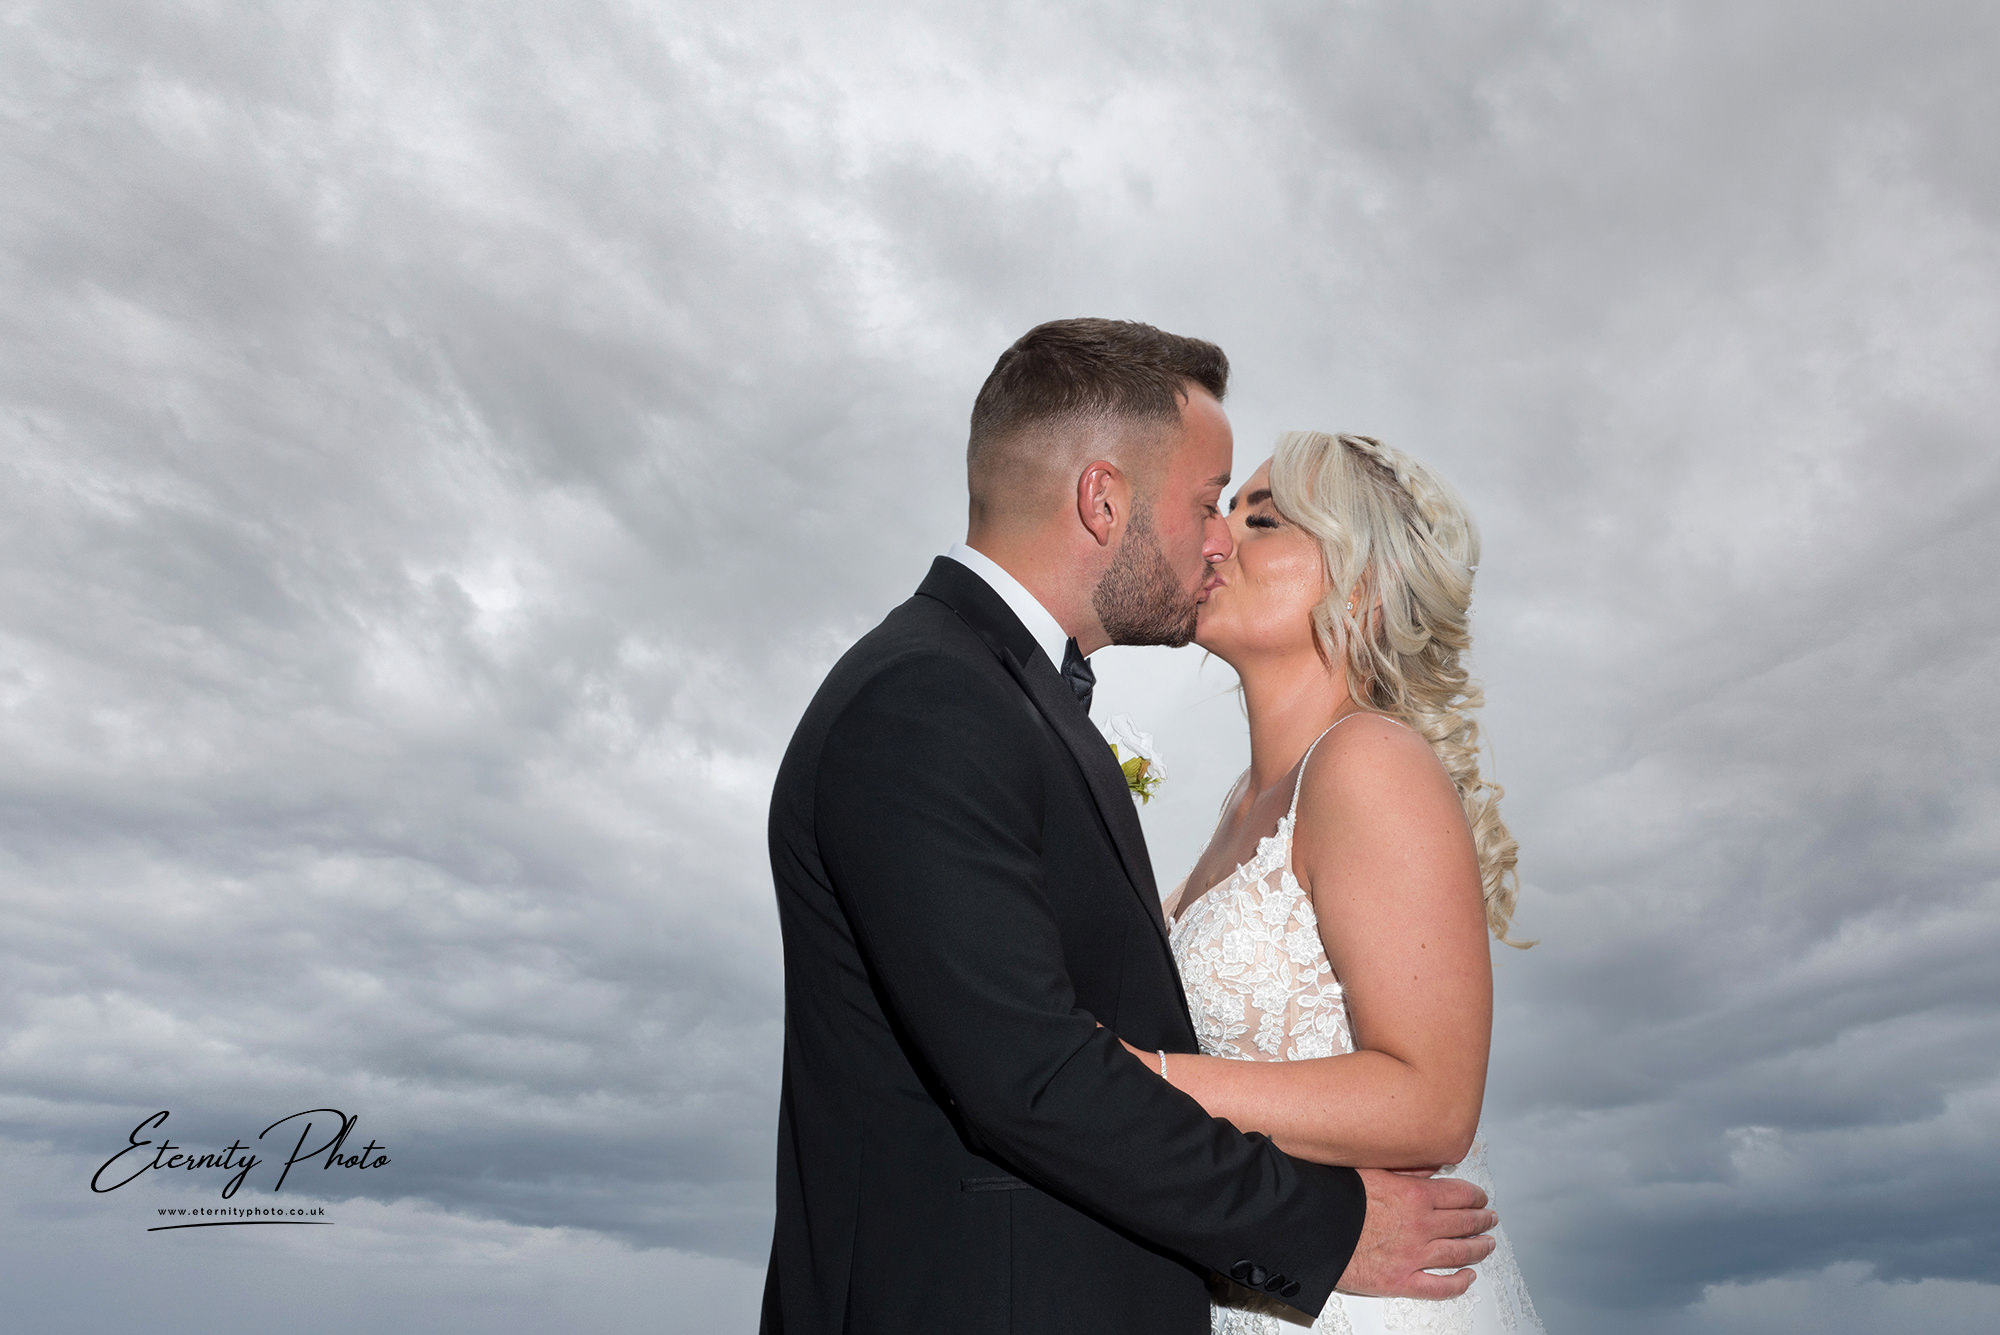 Couple kissing under dramatic clouds on wedding day.